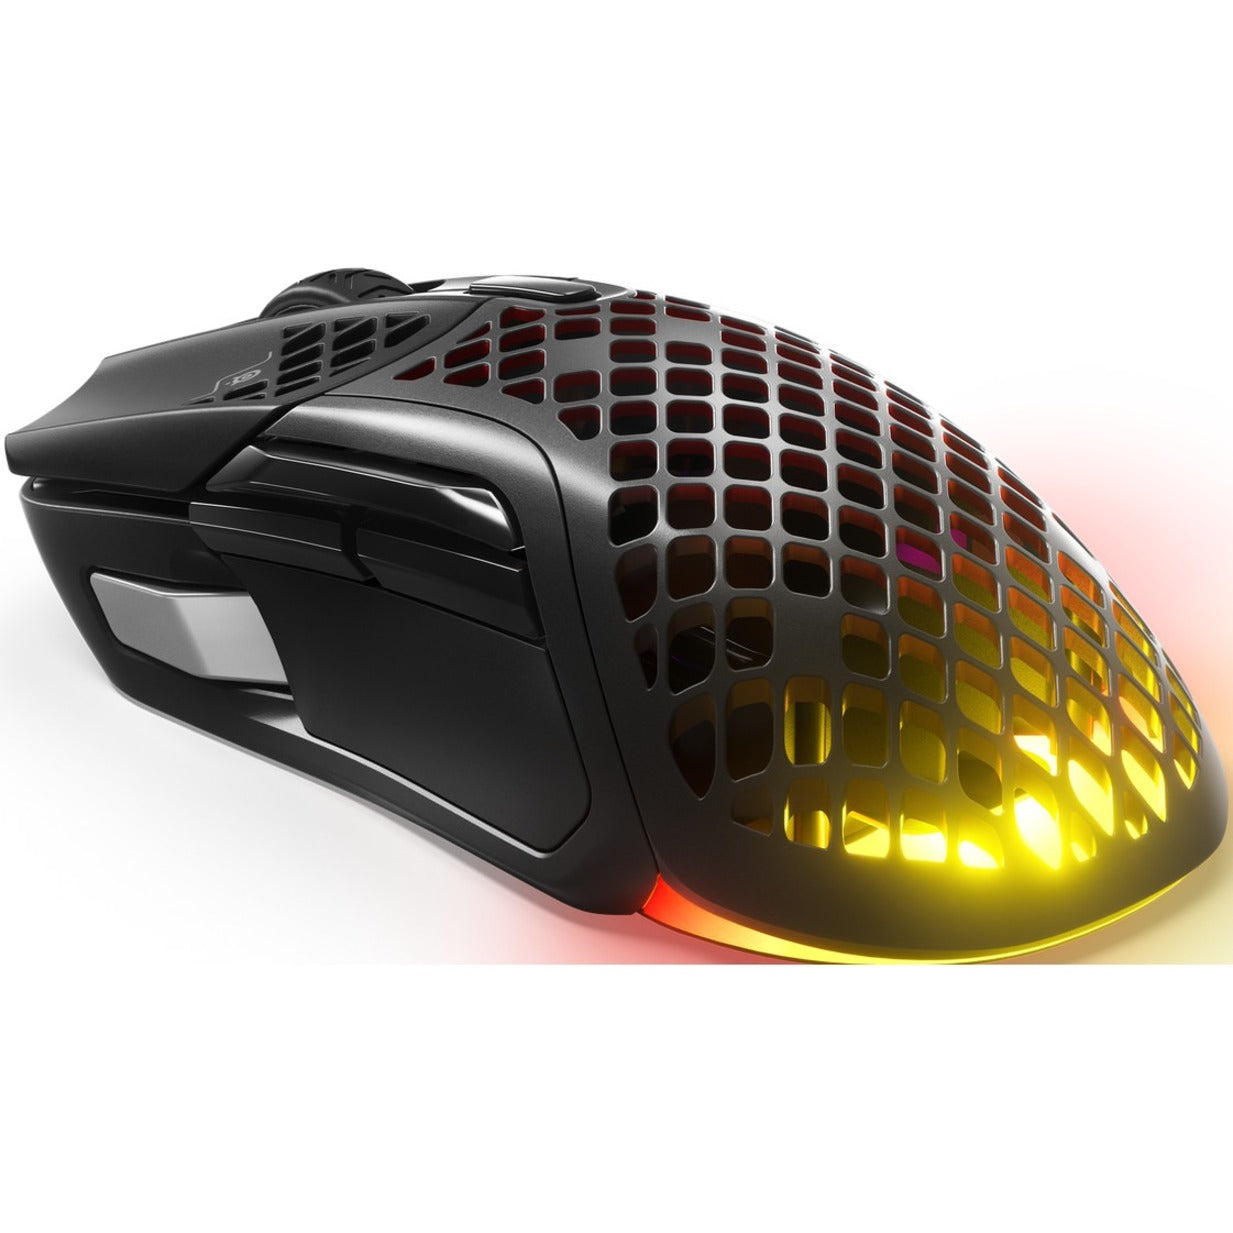 SteelSeries Aerox 5 Wireless Gaming Mouse (62406) – Network Hardwares